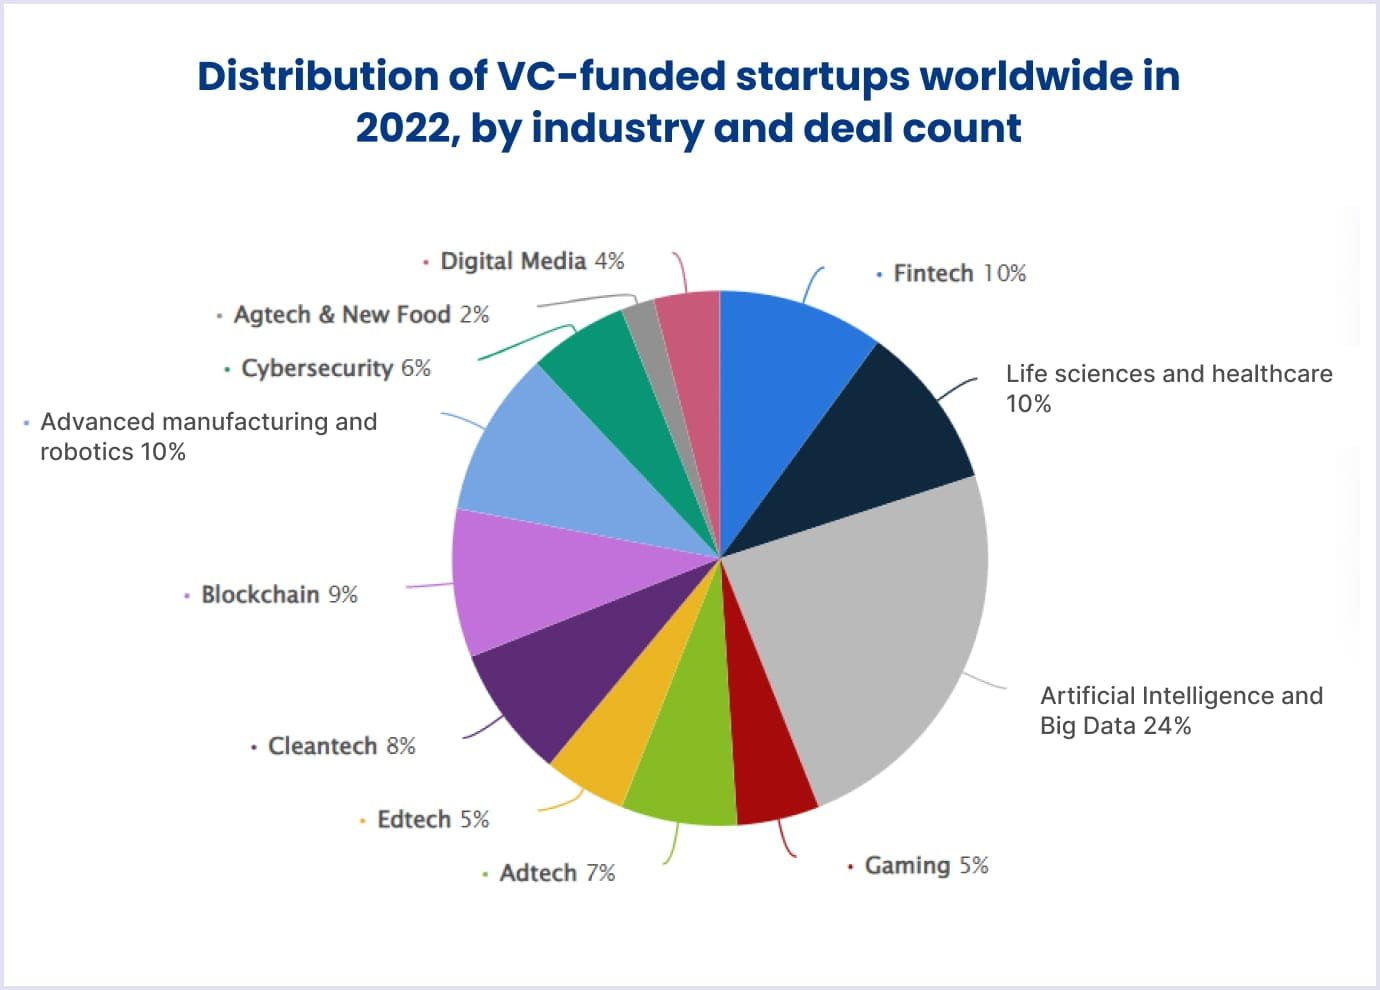 VC-funded startups distribution worldwide